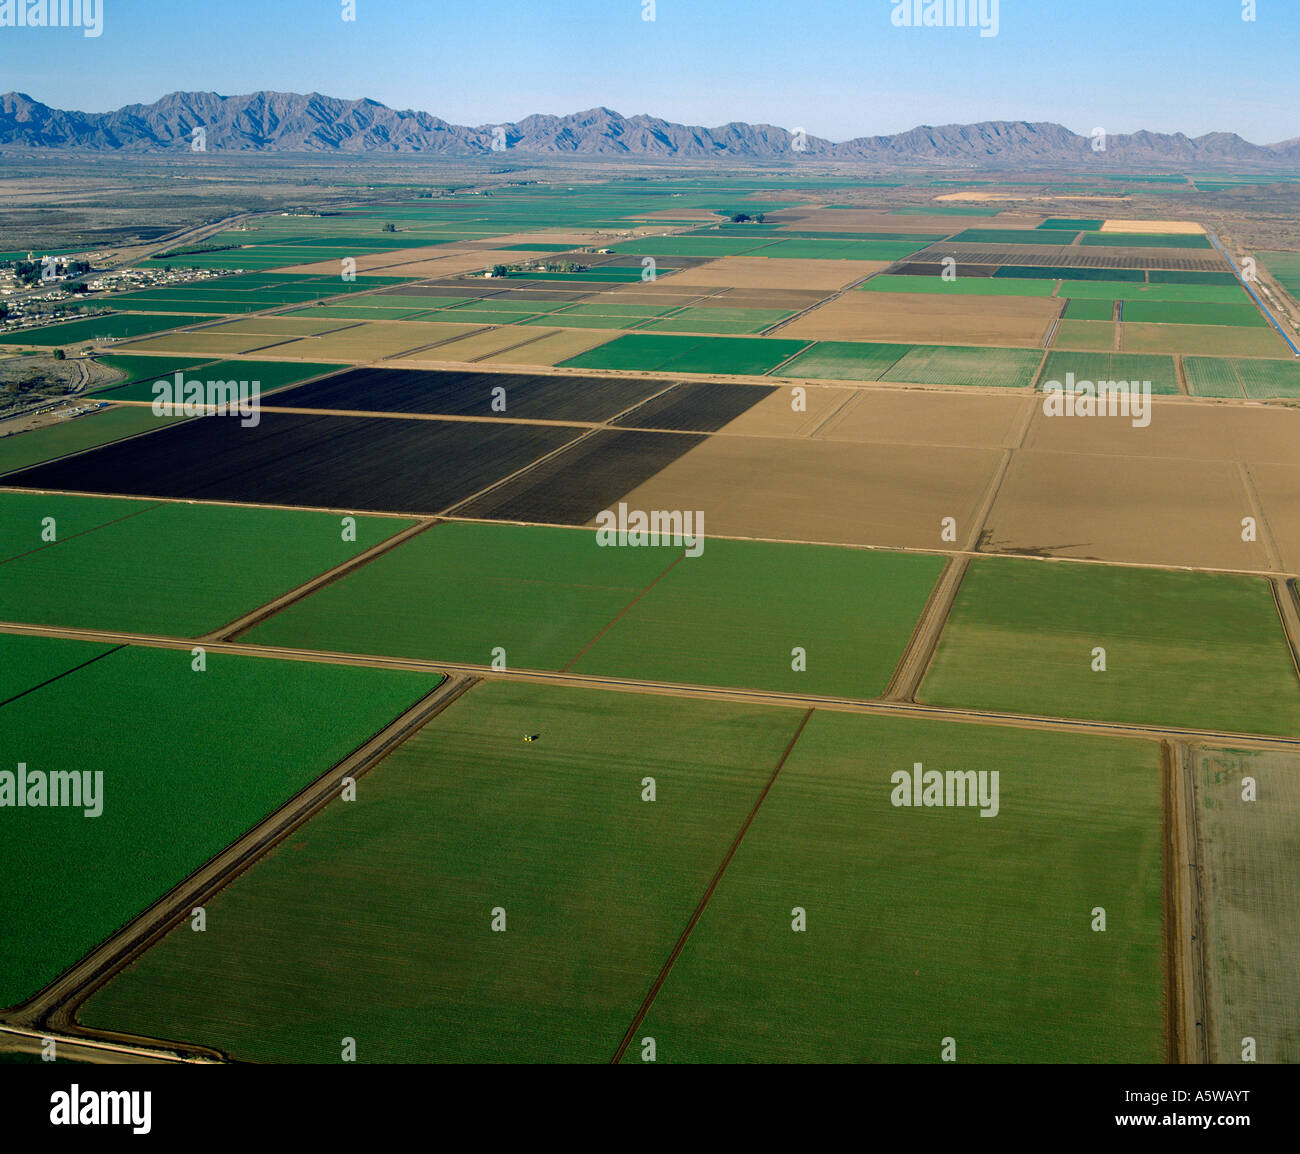 IRRIGATED DESERT; BROWN GROUND IS NOT YET PLANTED, YELLOW-GREEN FIELDS ARE LETTUCE, BRIGHT GREEN IS ALFALFA / ARIZONA Stock Photo